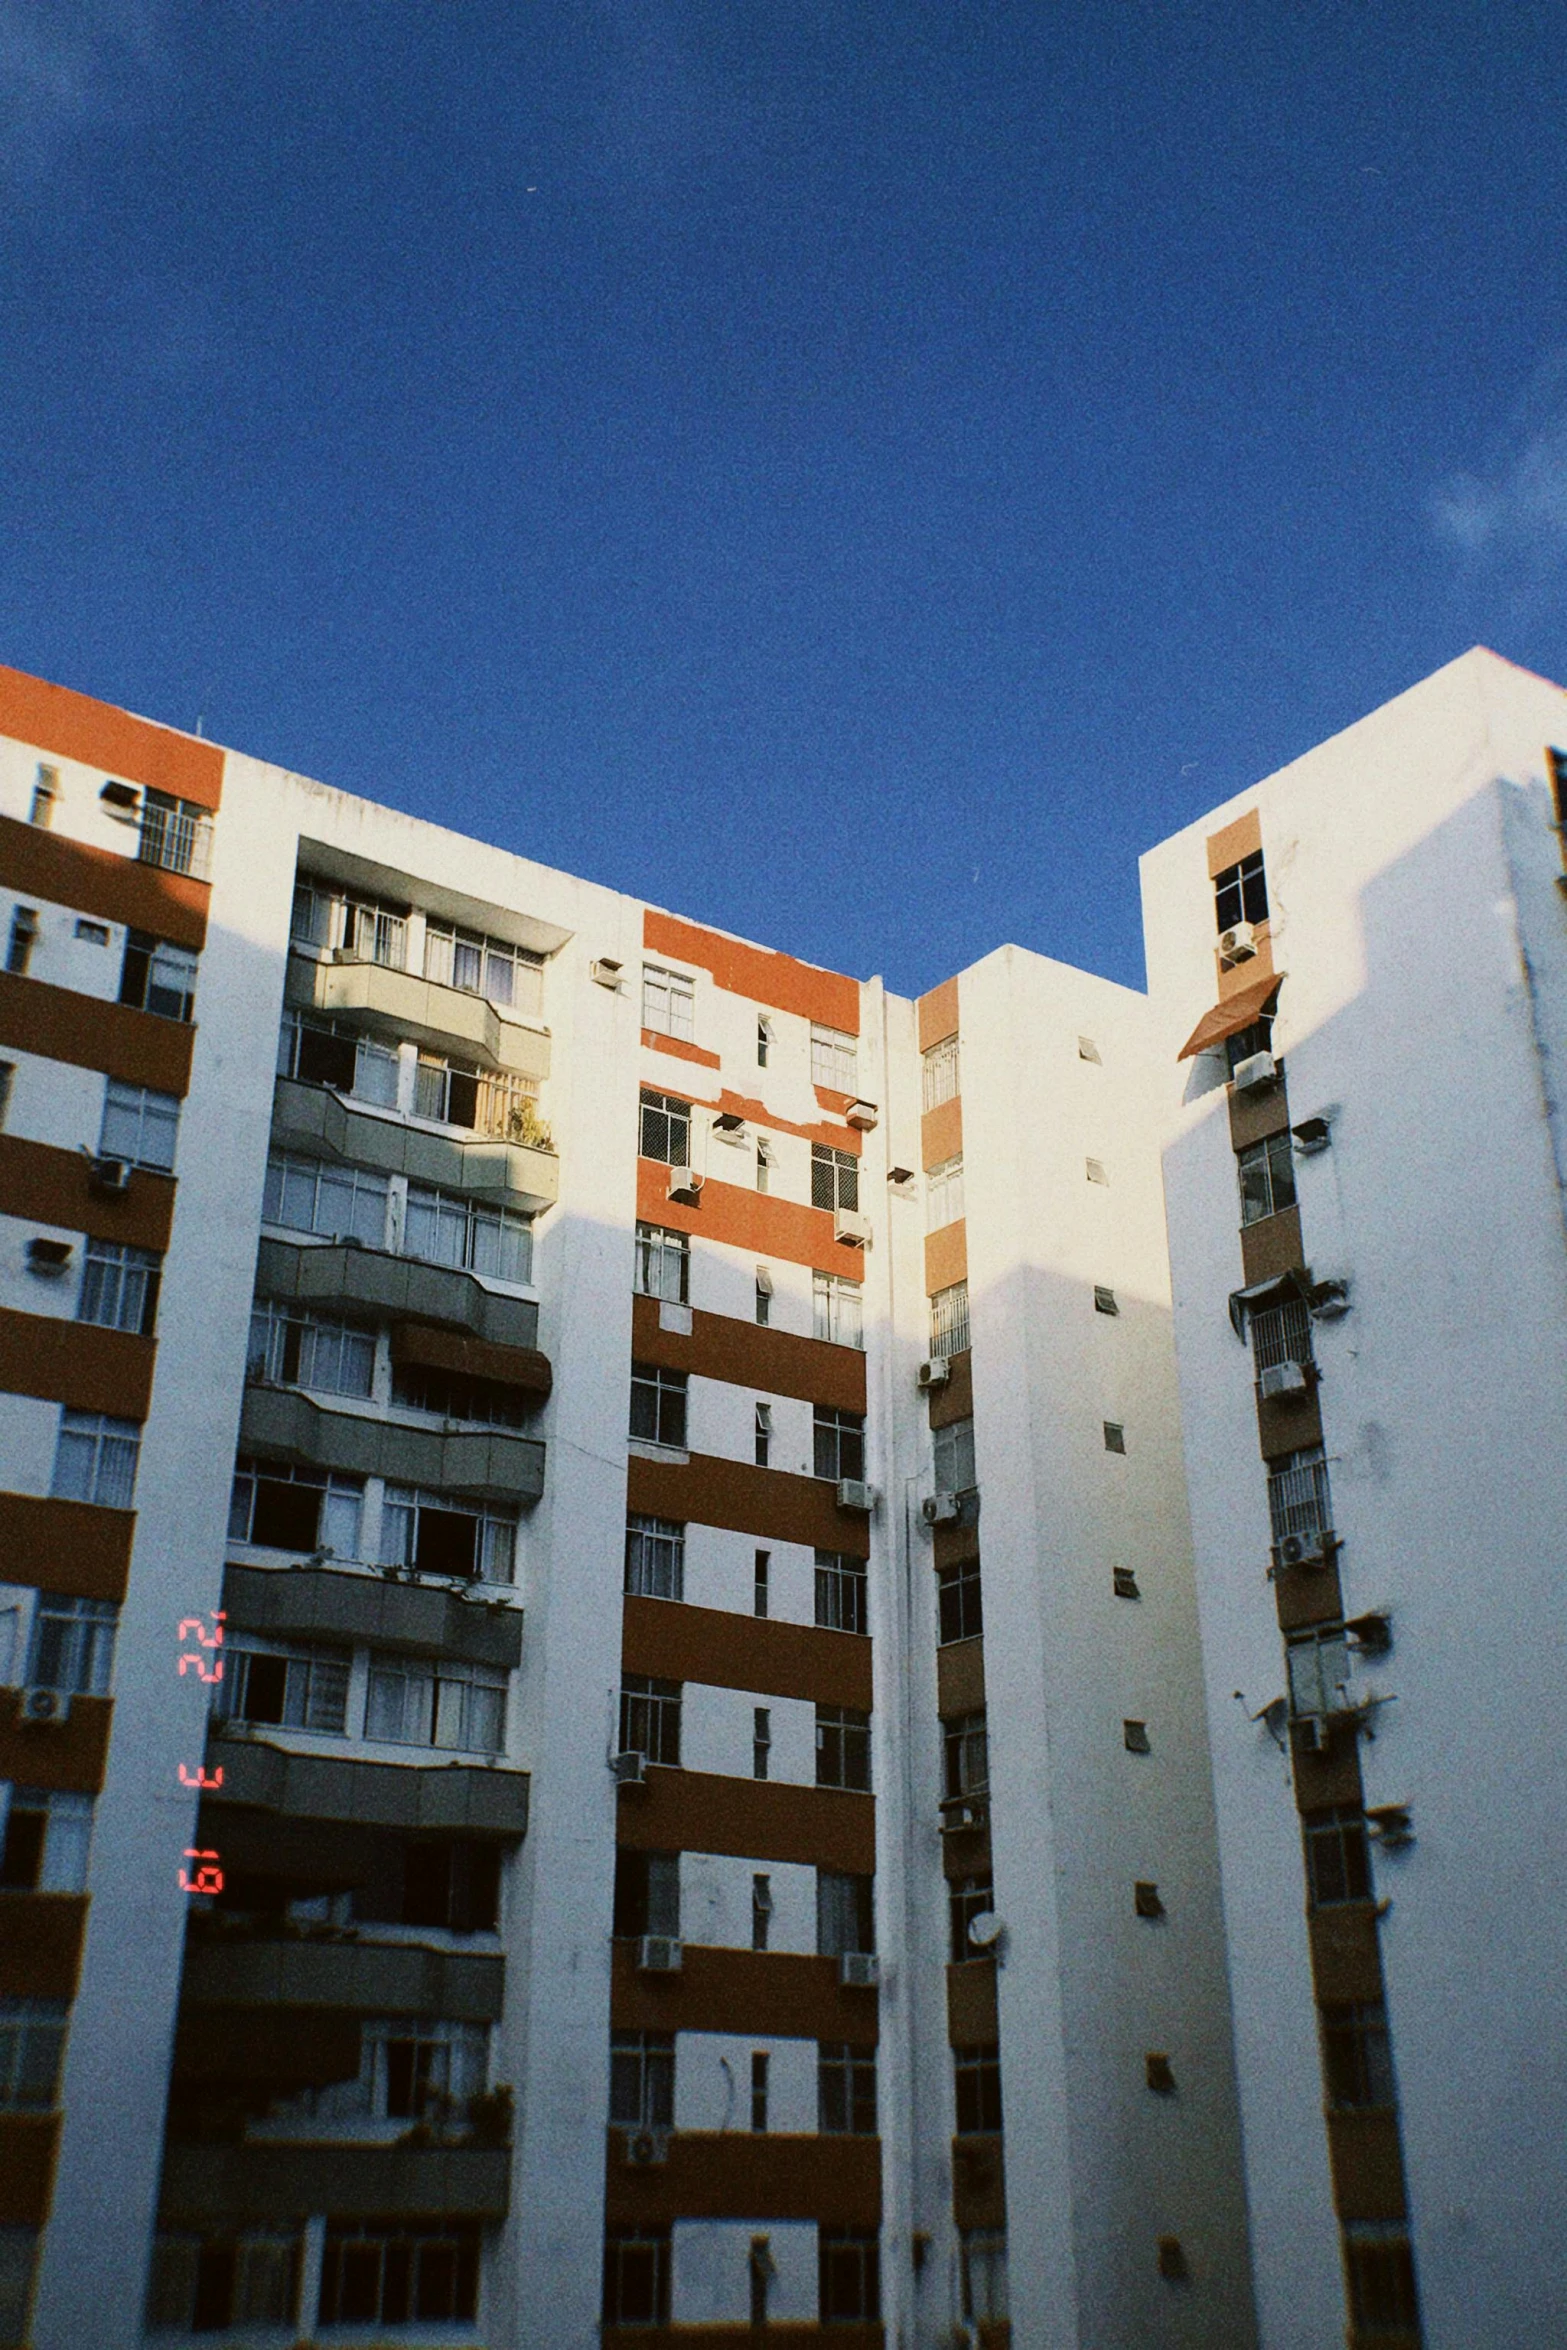 the white, red, and beige high rise apartment buildings